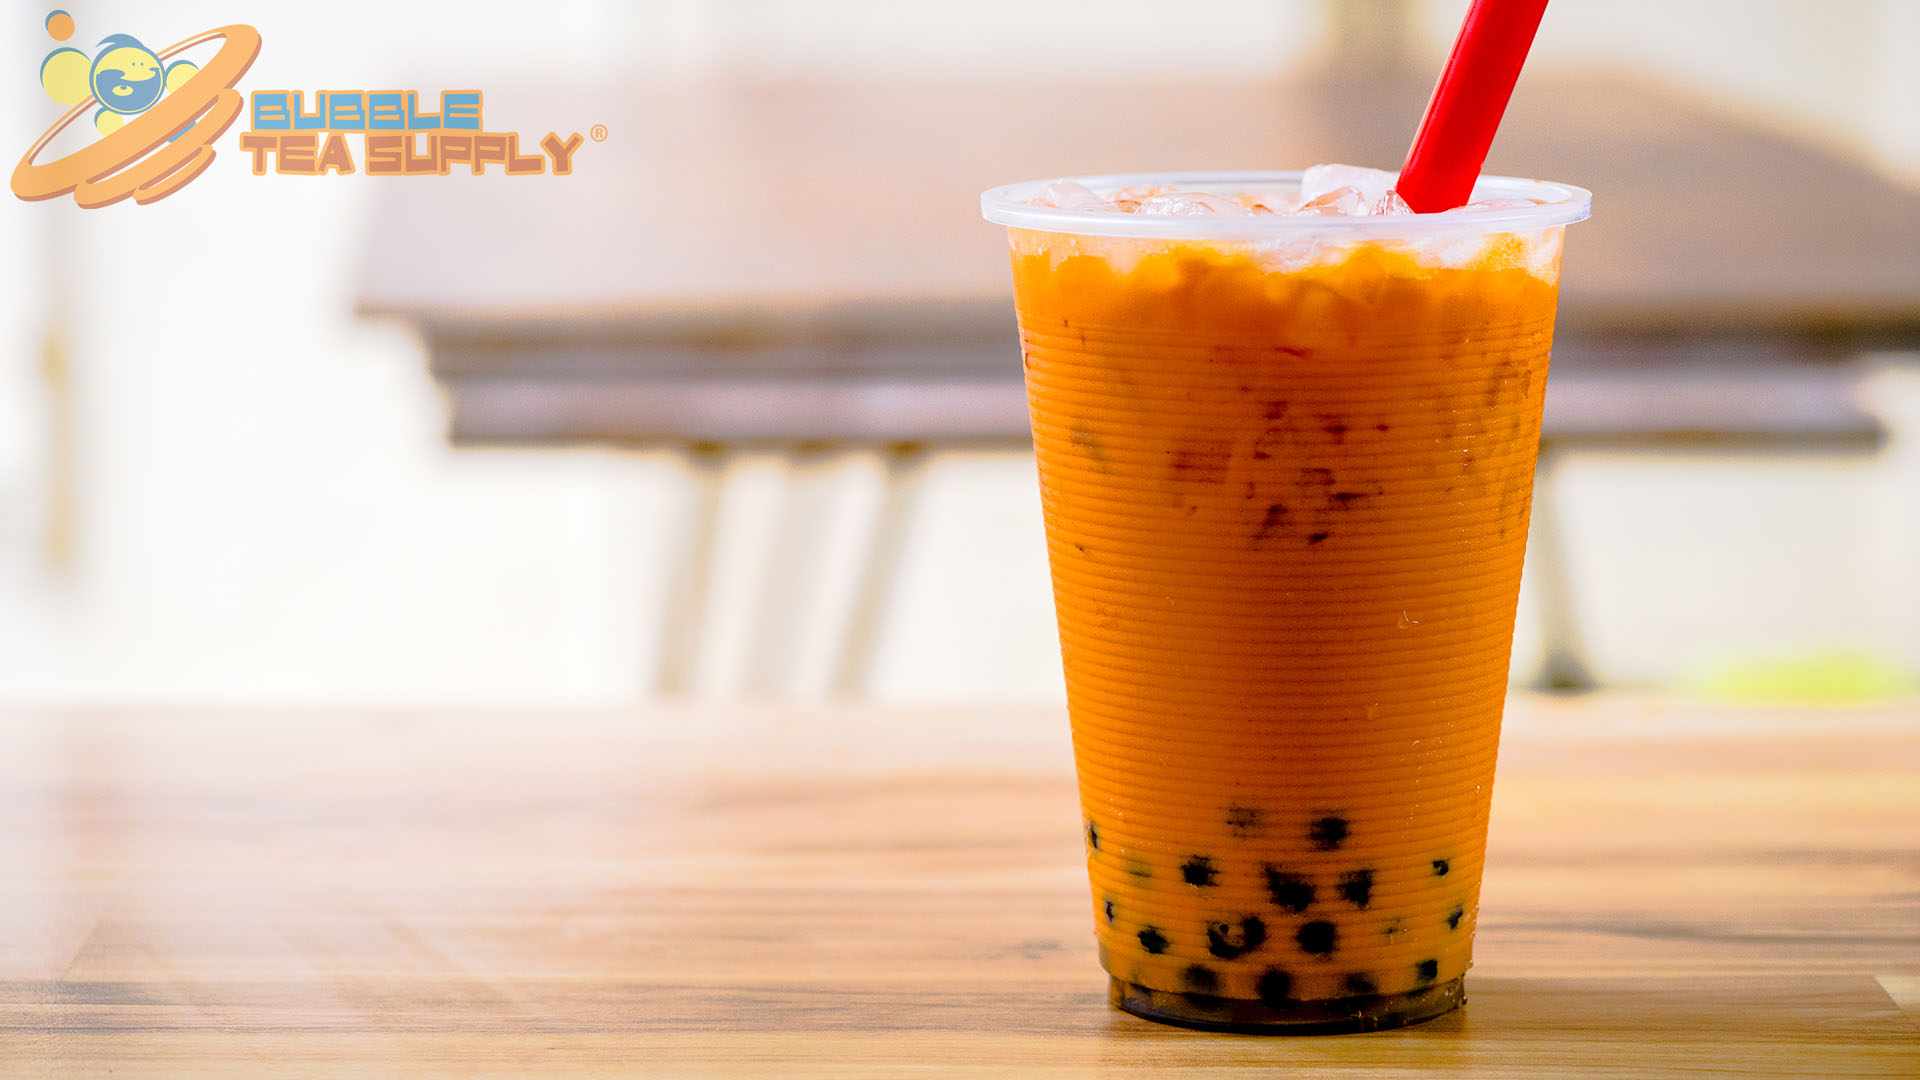 How To Make Instant Thai Tea Bubble Tea With Boba Tapioca Pearls Bubble Tea Supply Blog,How To Saute Onions And Mushrooms